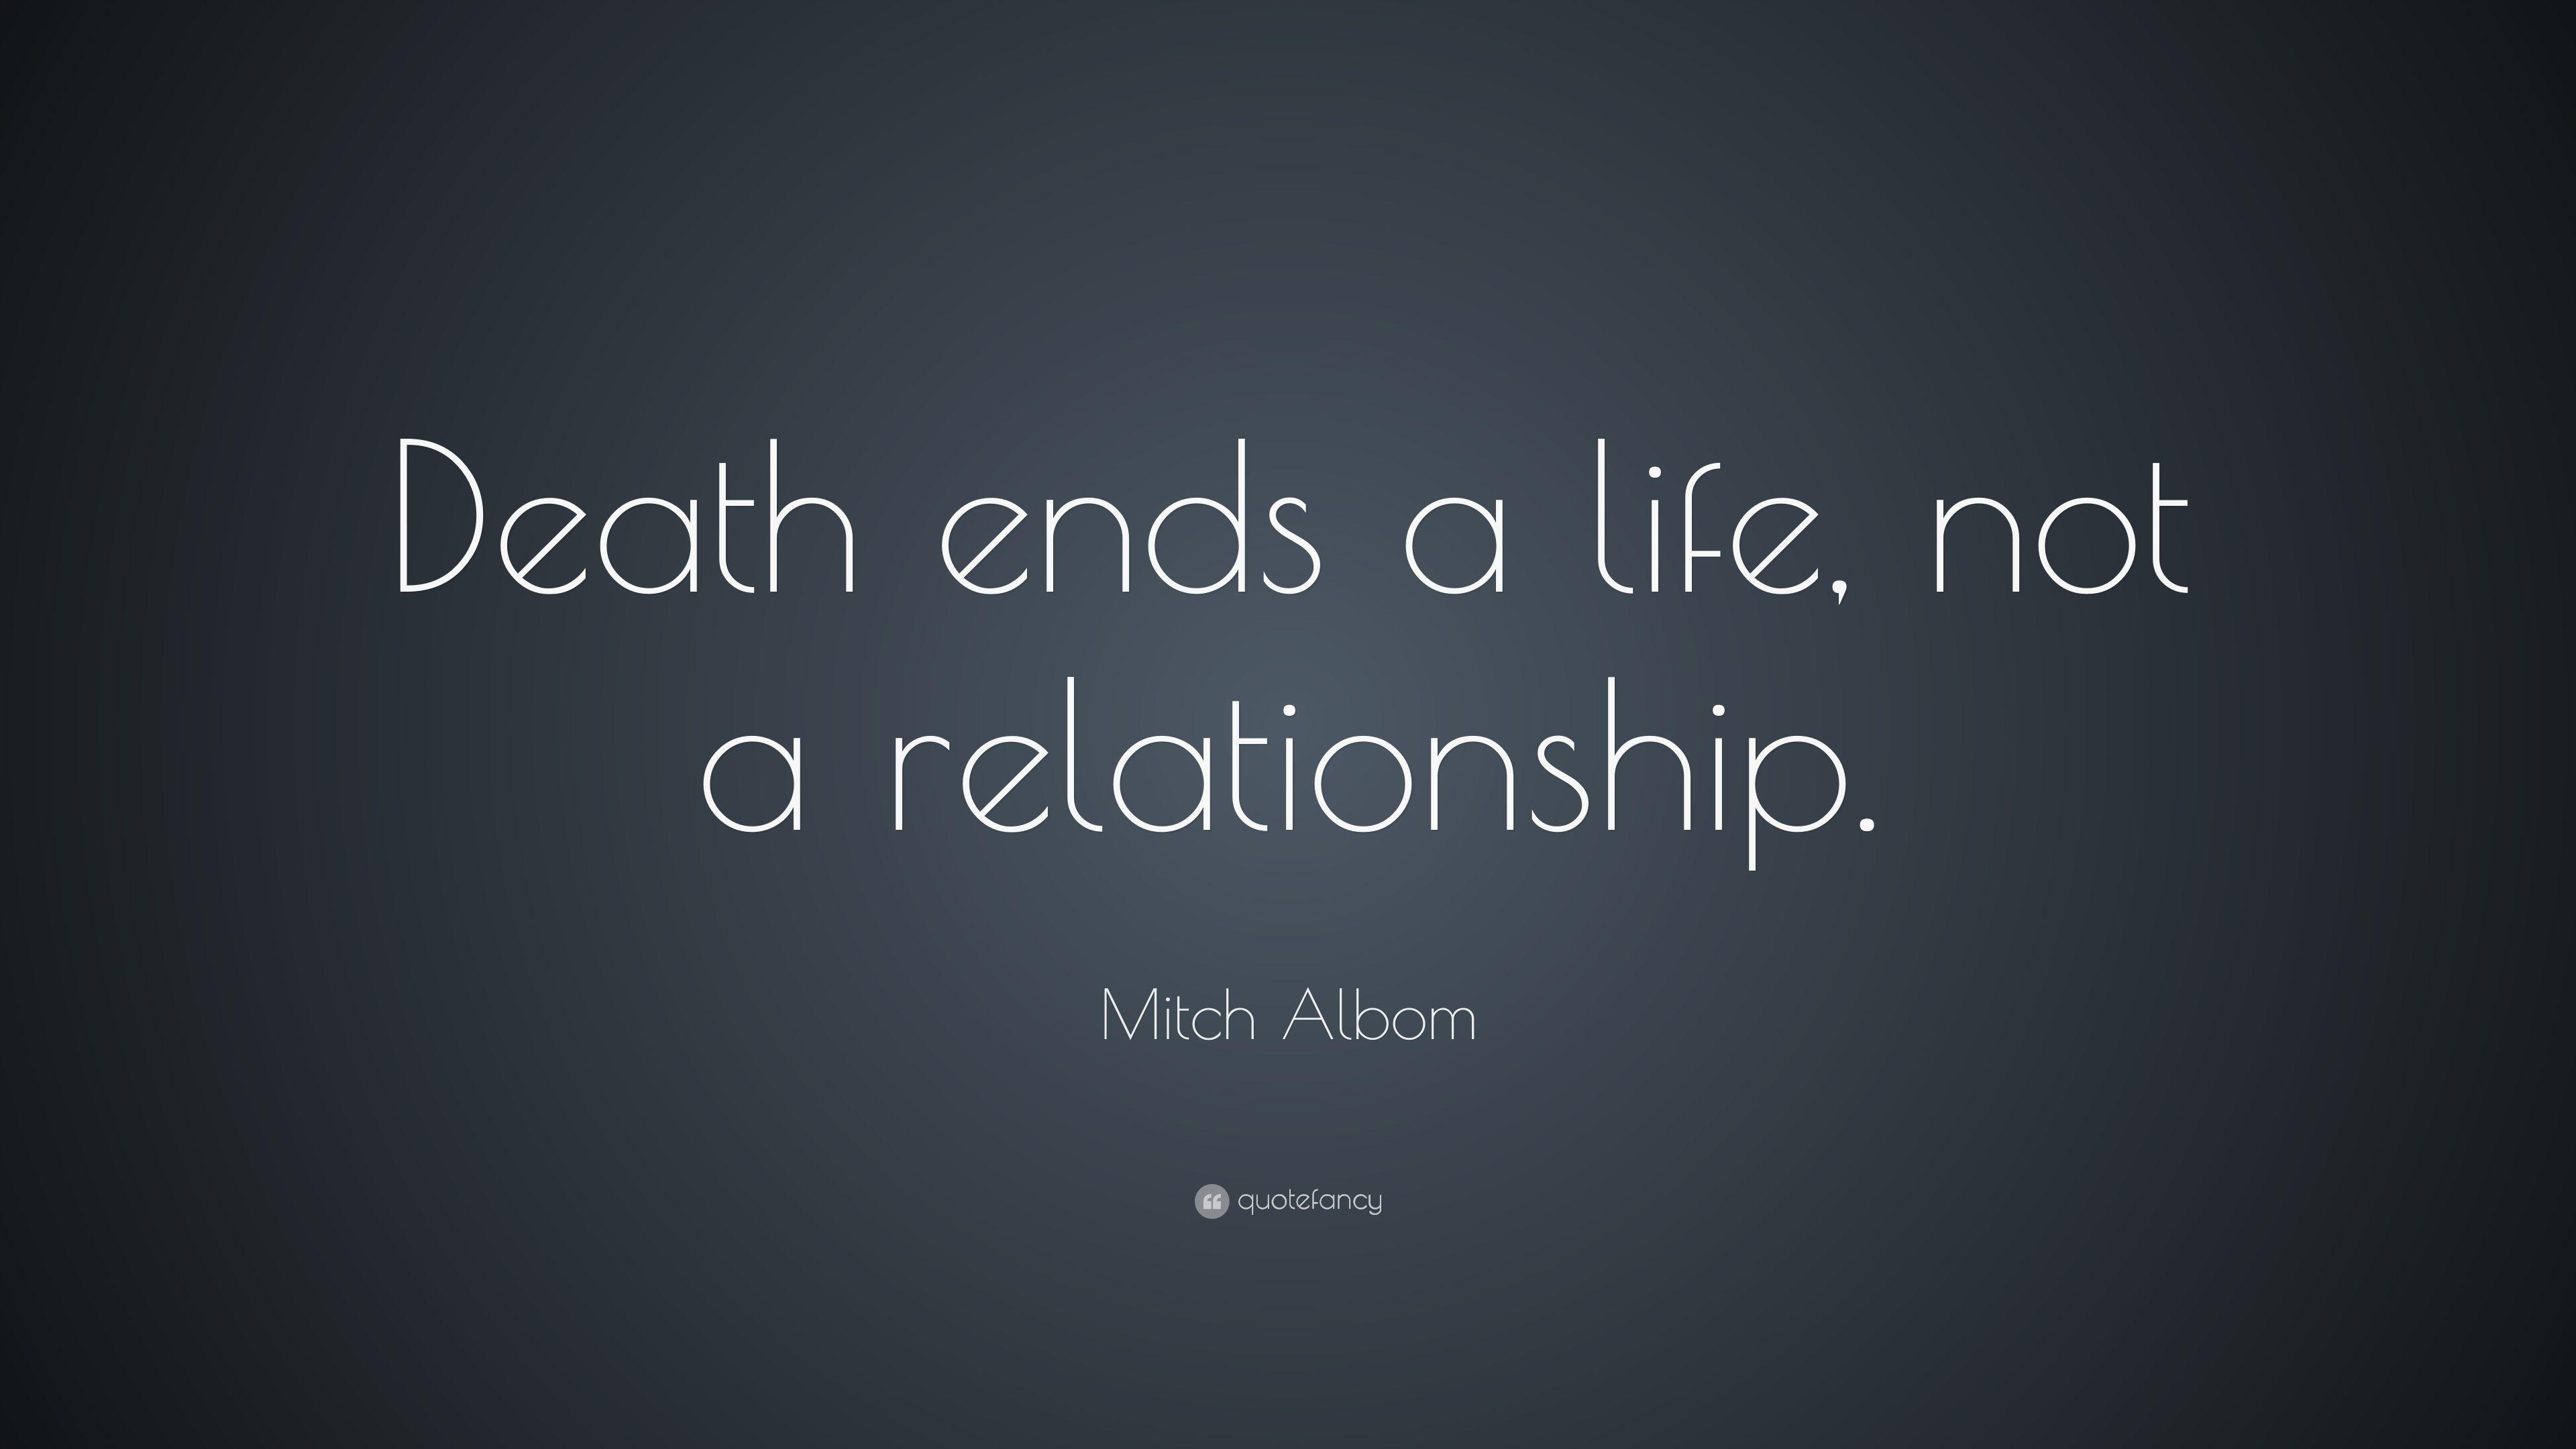 Mitch Albom Quote: “Death ends a life, not a relationship.” 23